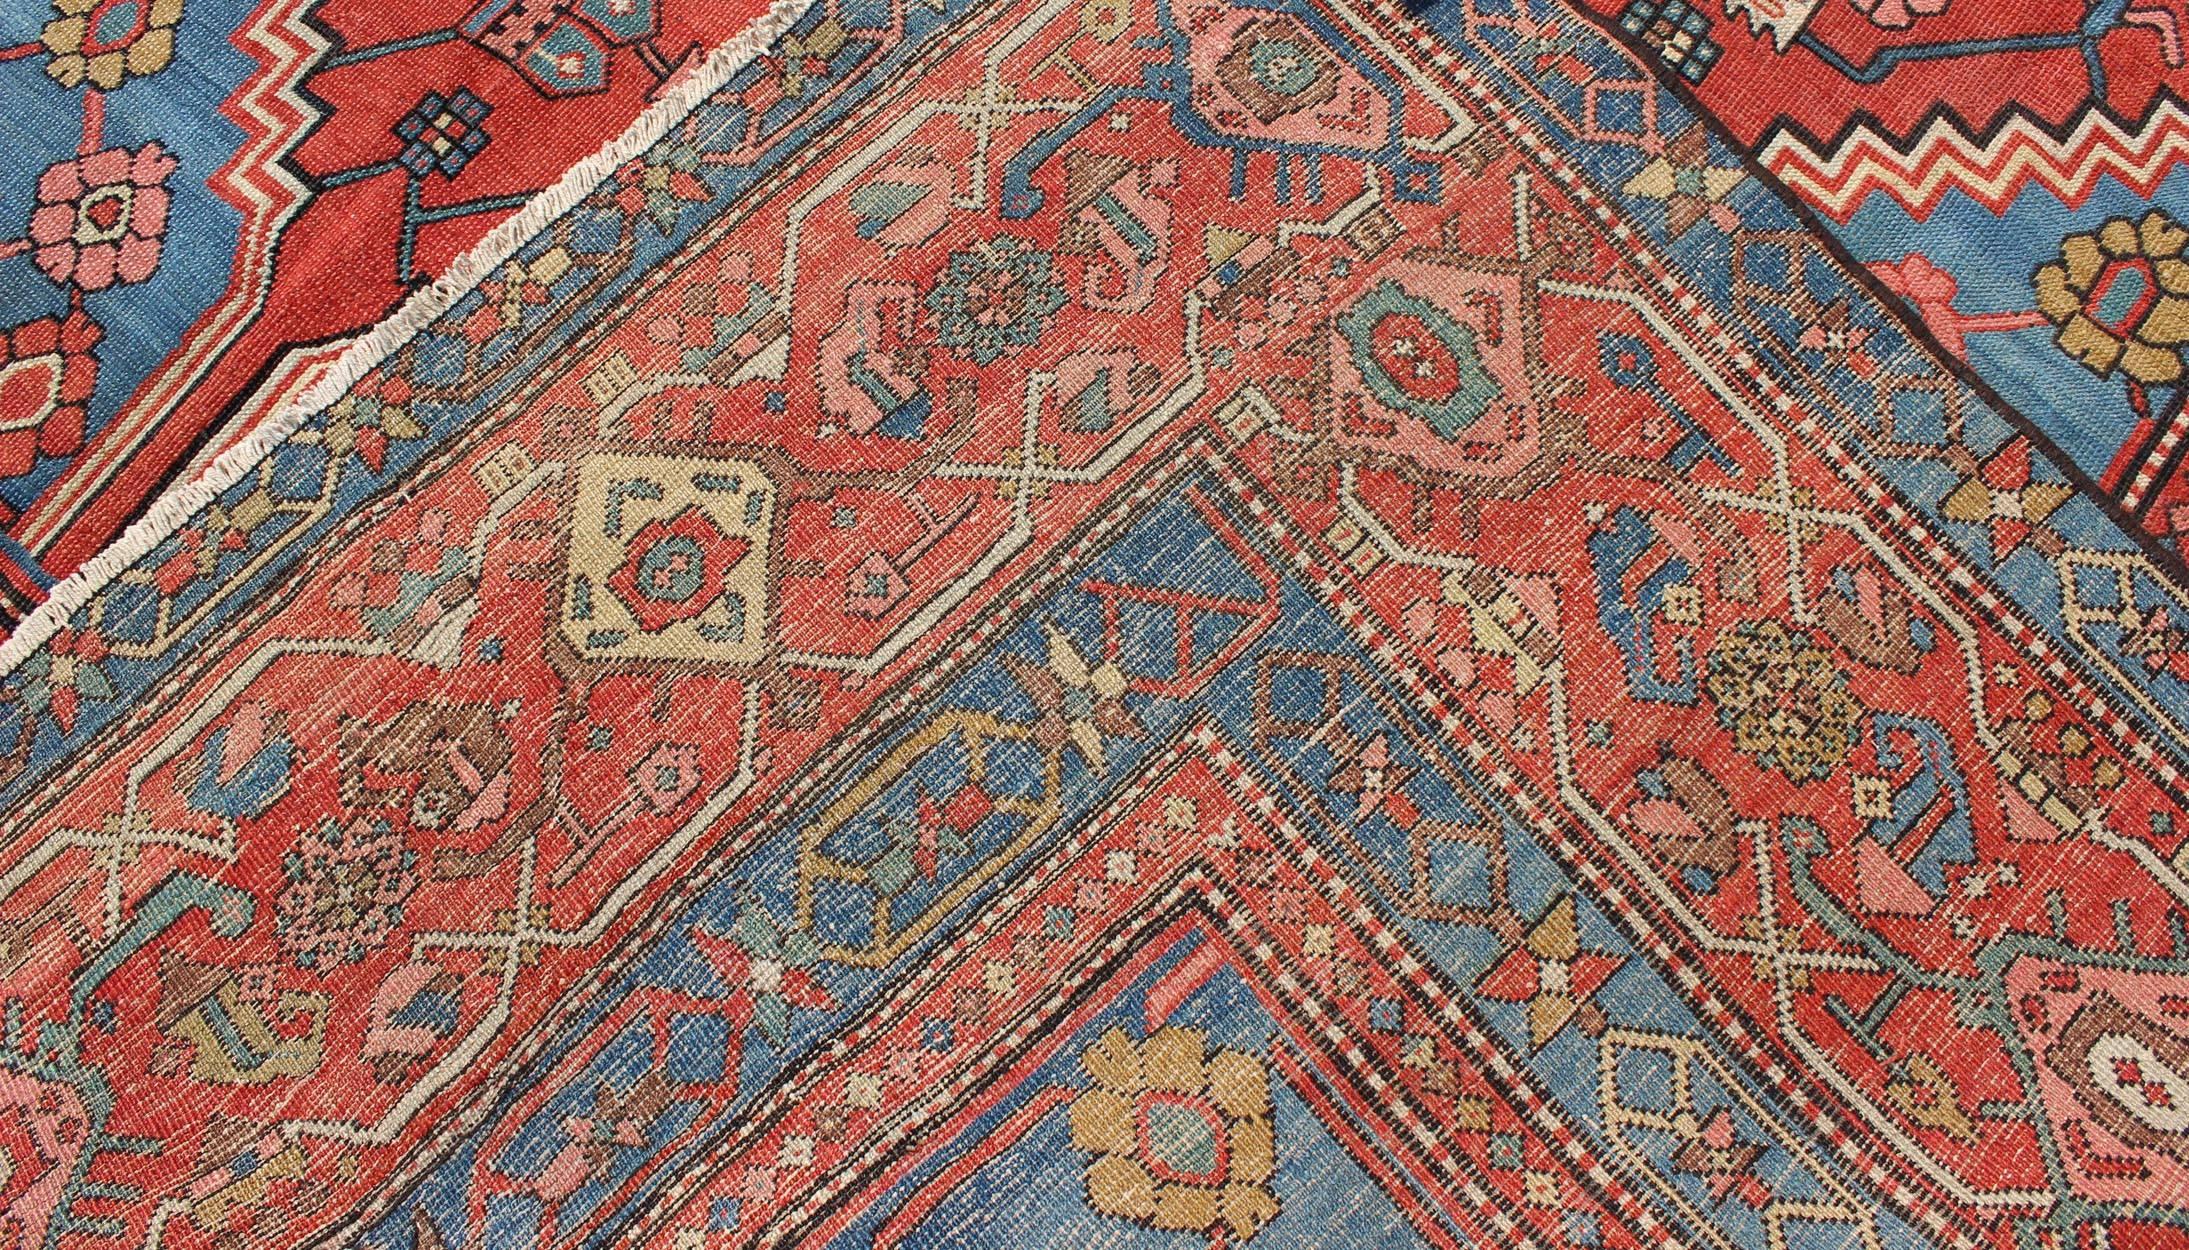 Wool Antique Persian Bakhshaish Carpet with a Unique Geometric Medallion and Design For Sale